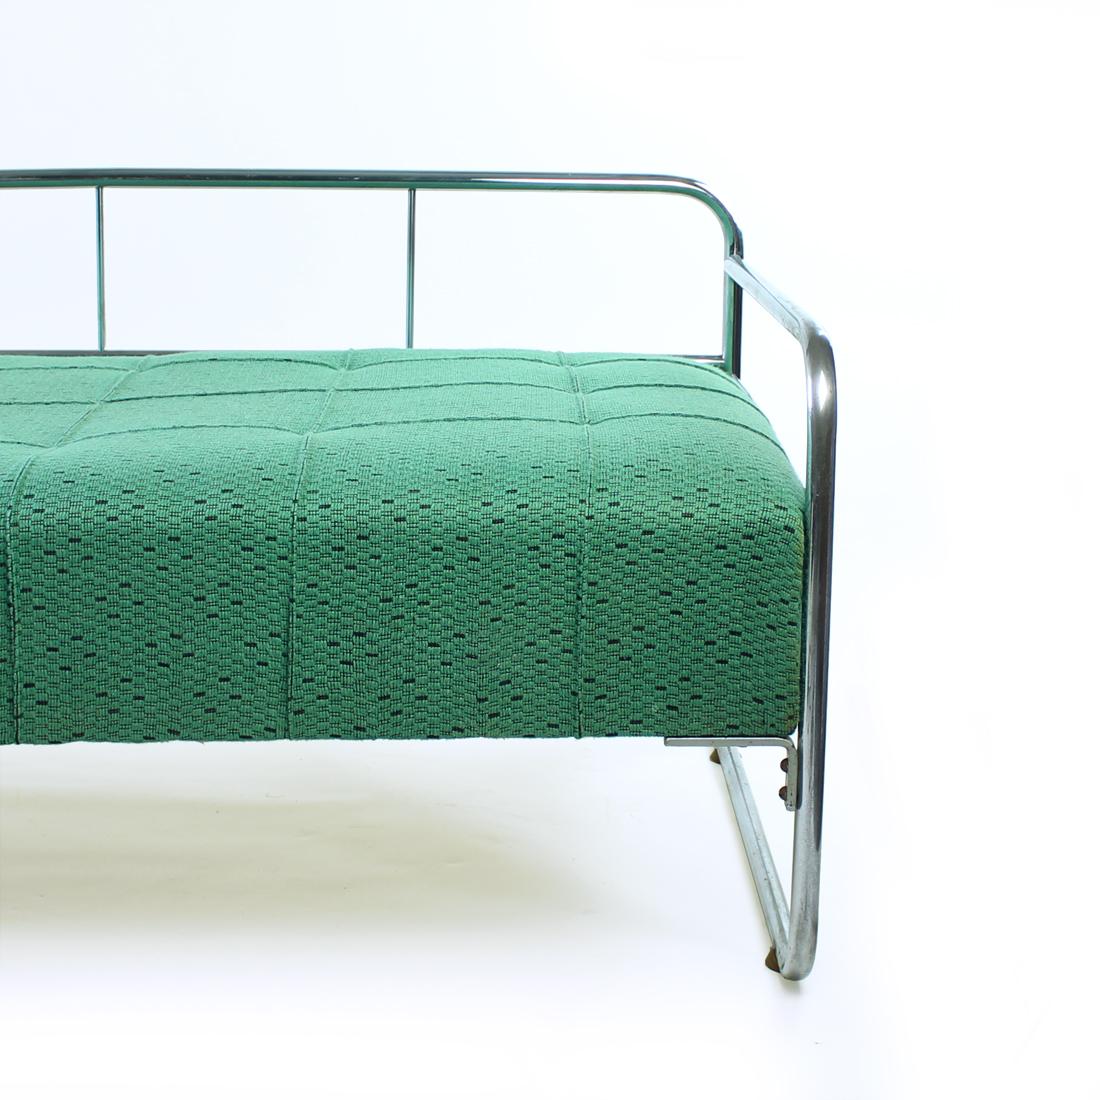 Beautiful, original daybed, or a bed from Czechoslovakia. Produced in a Bauhaus era of 1940s in an elegant chrome metal pipes. The frame has elegantly designed sides and back with typical design of the era. The cushion/mattrace is original. The